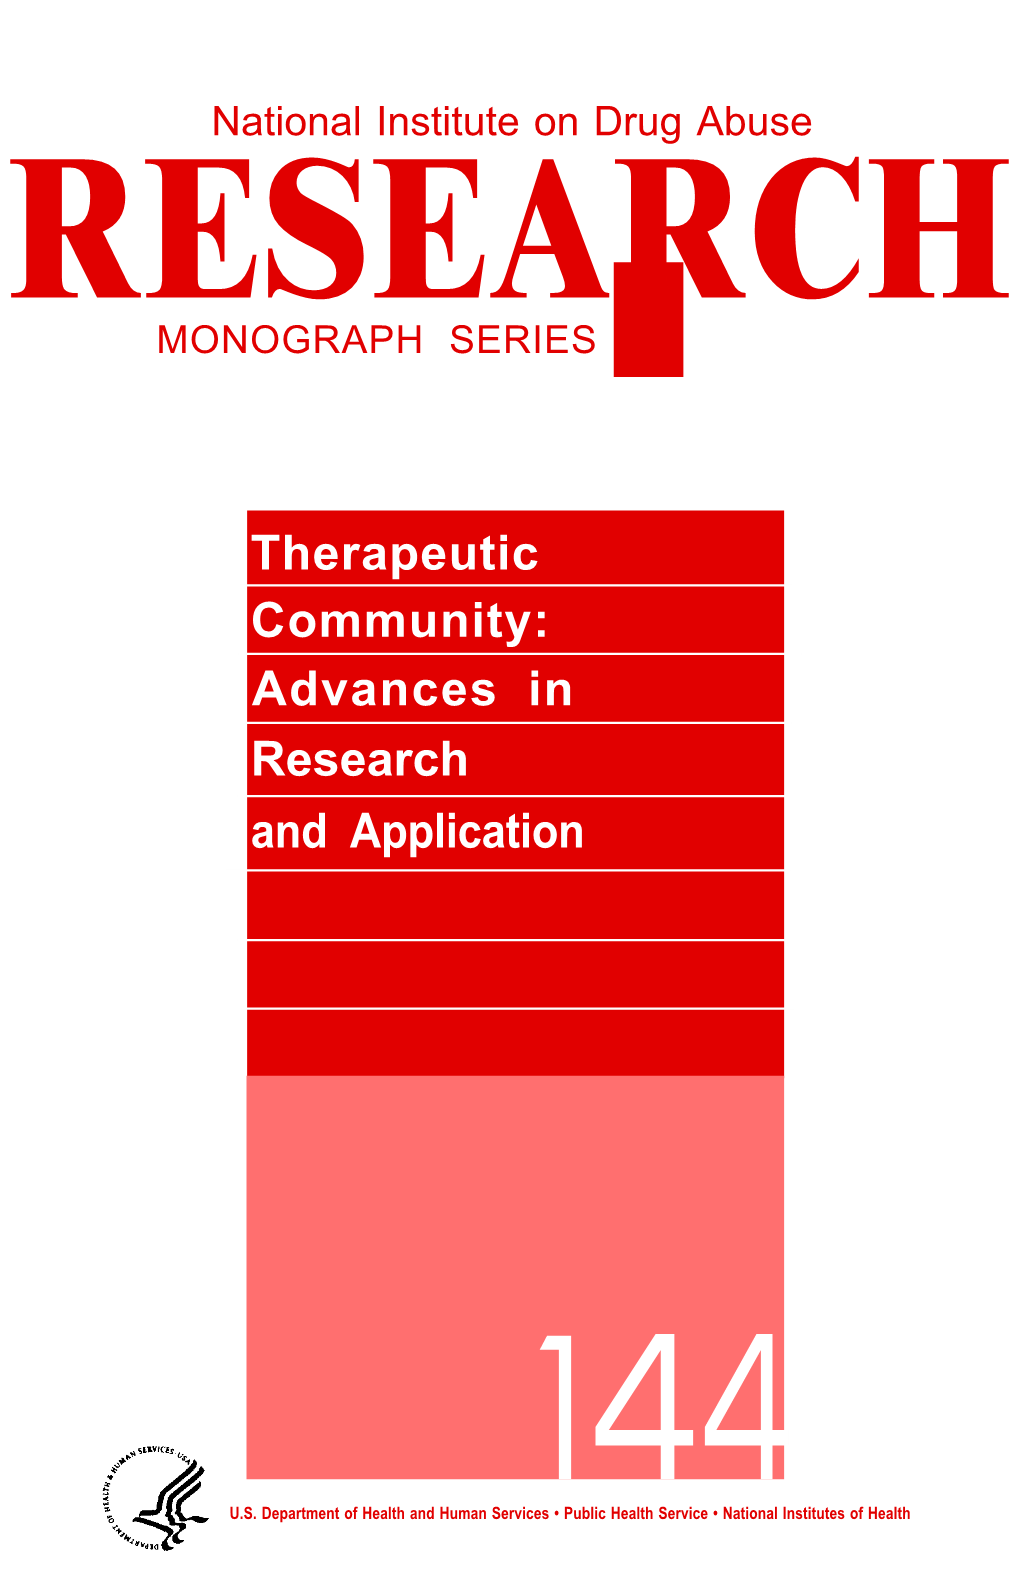 Therapeutic Community: Advances in Research and Application